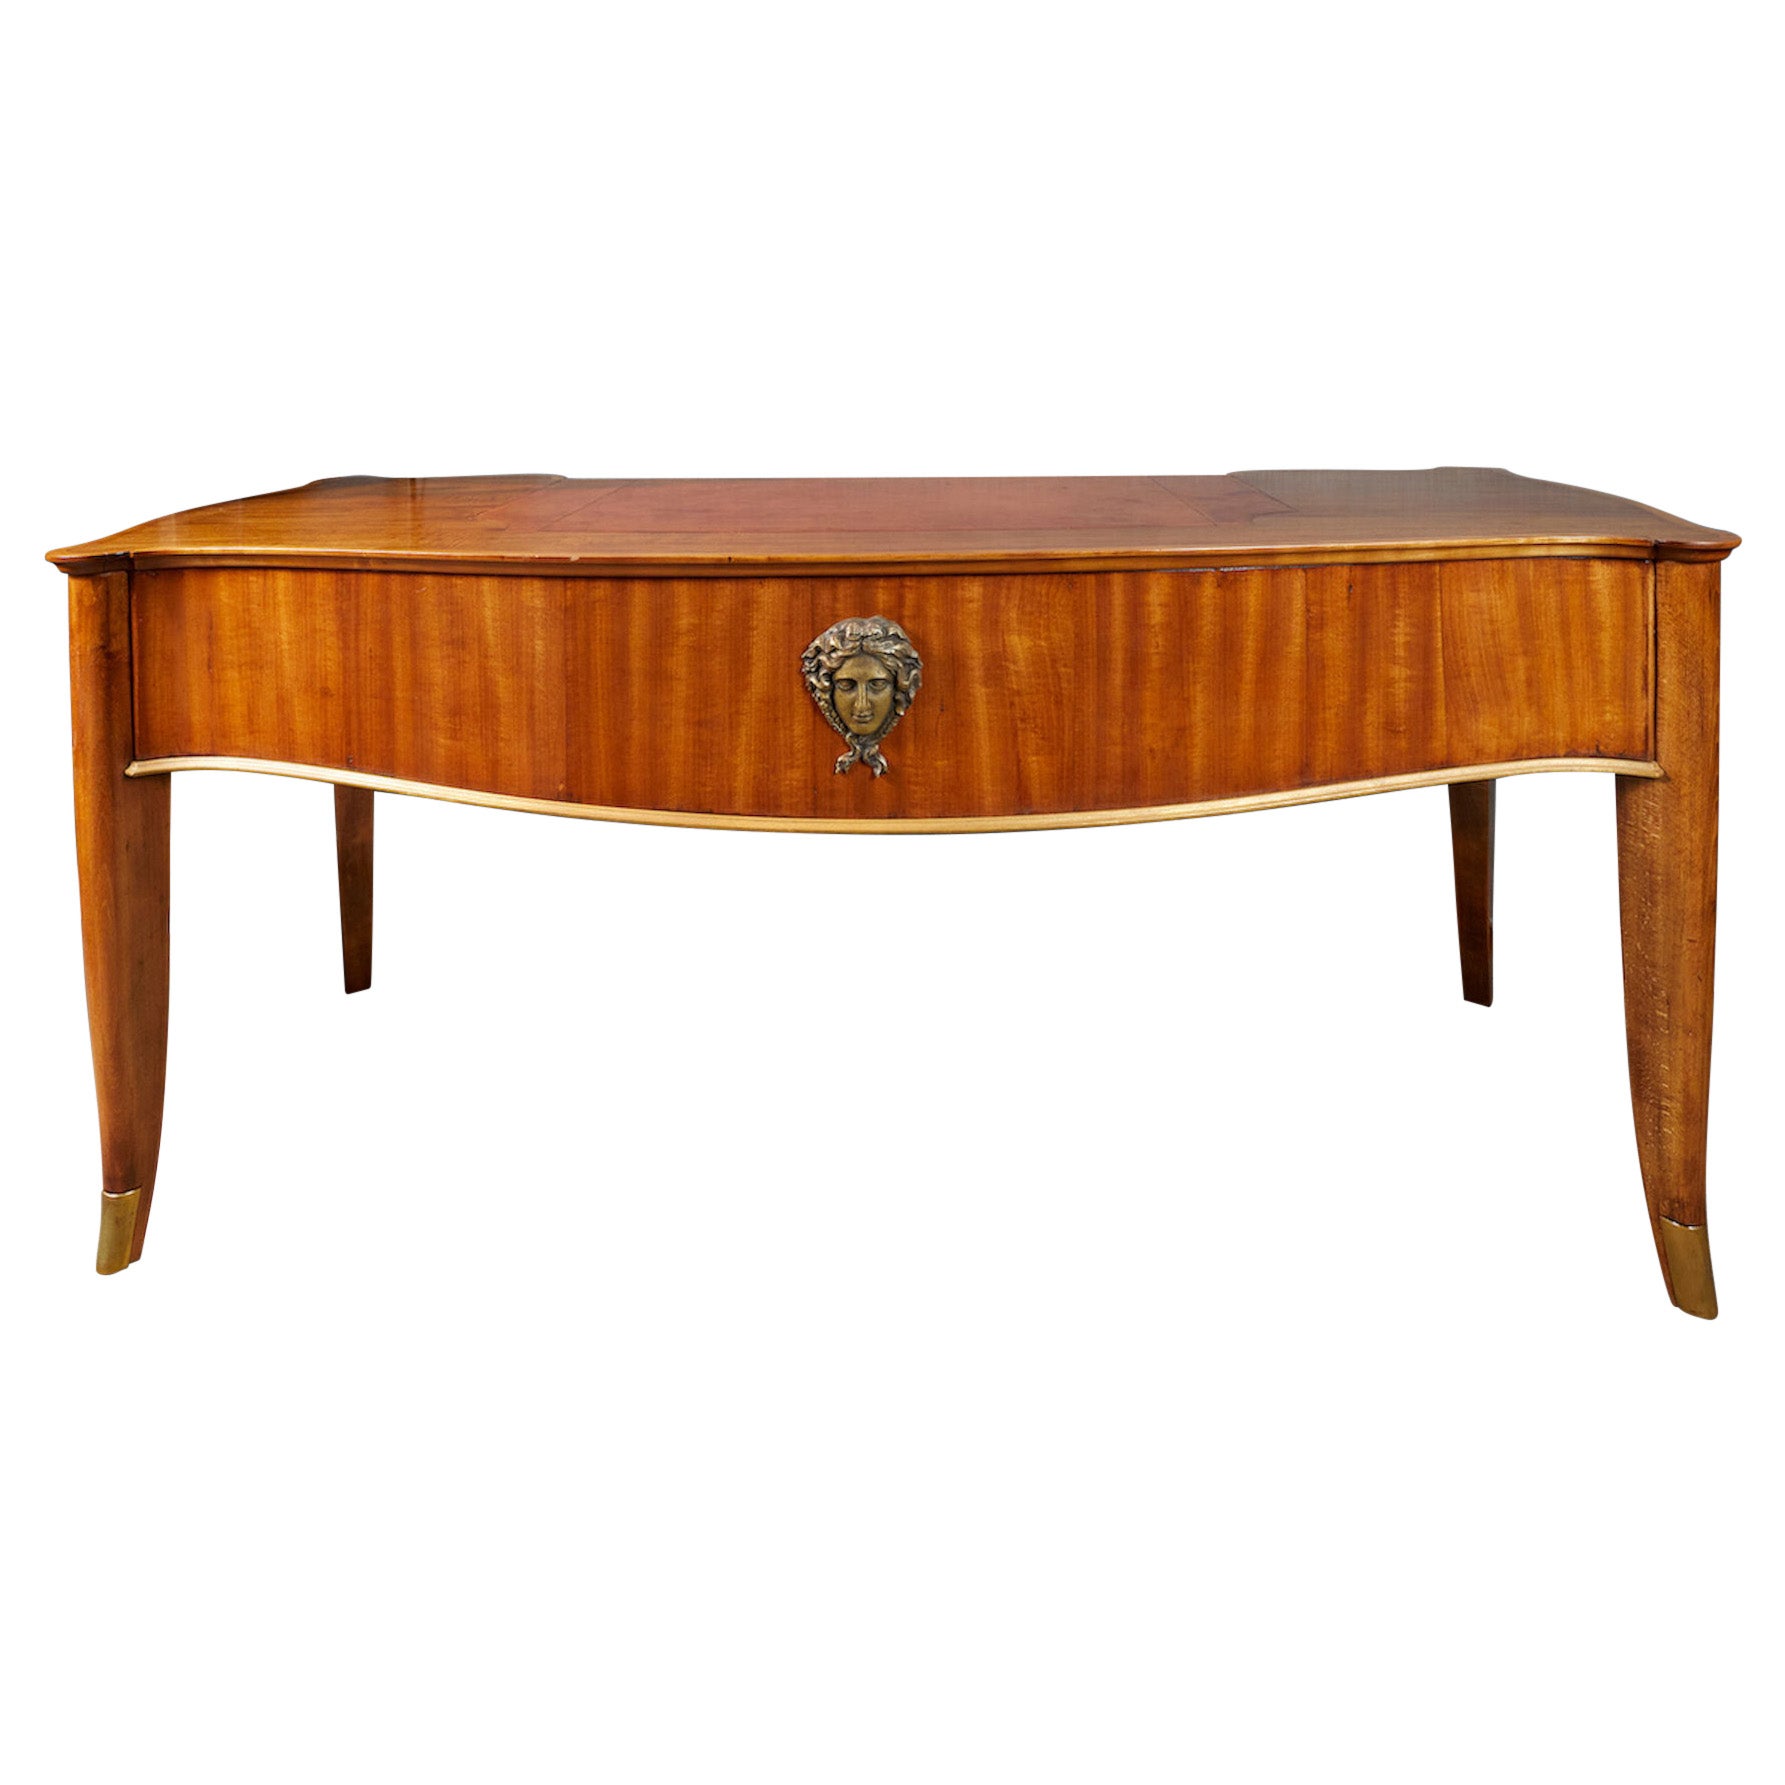 French Art Deco Mahogany Desk by André Arbus and Vadim Androussov